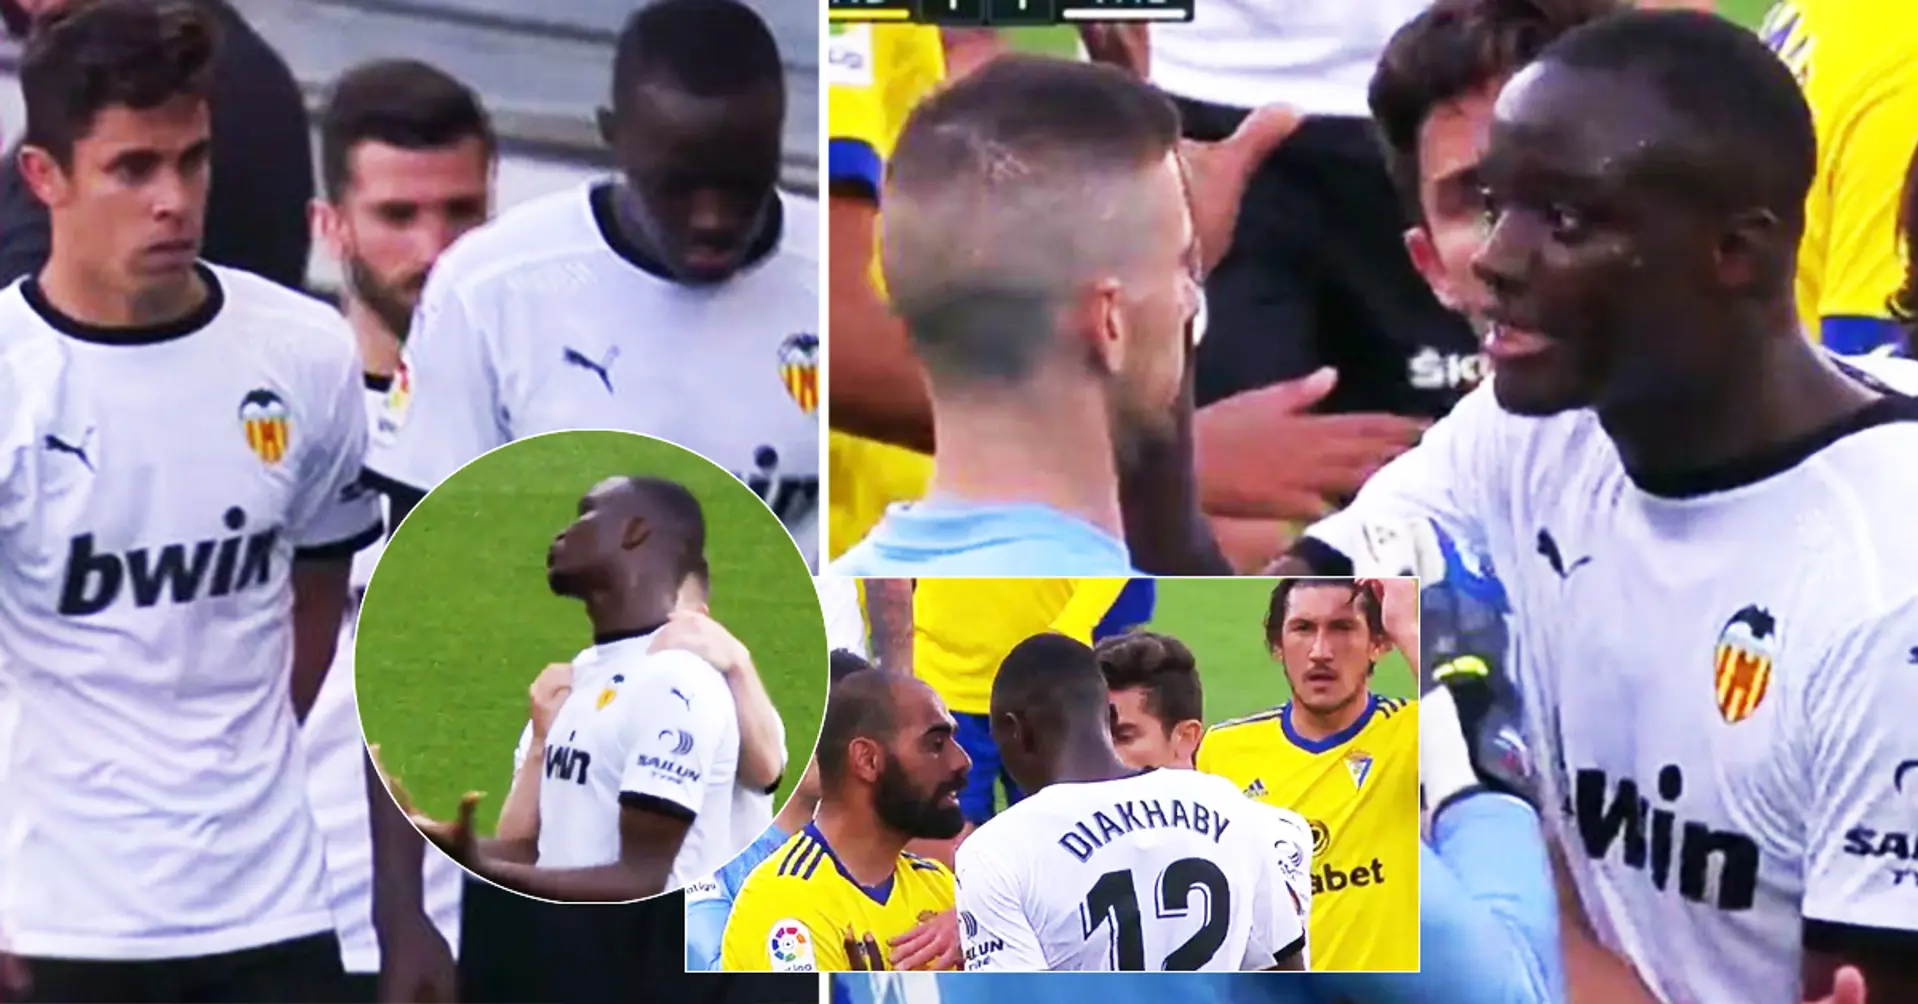 'You can't say it'. Entire Valencia team walks off the pitch during game after racial abuse